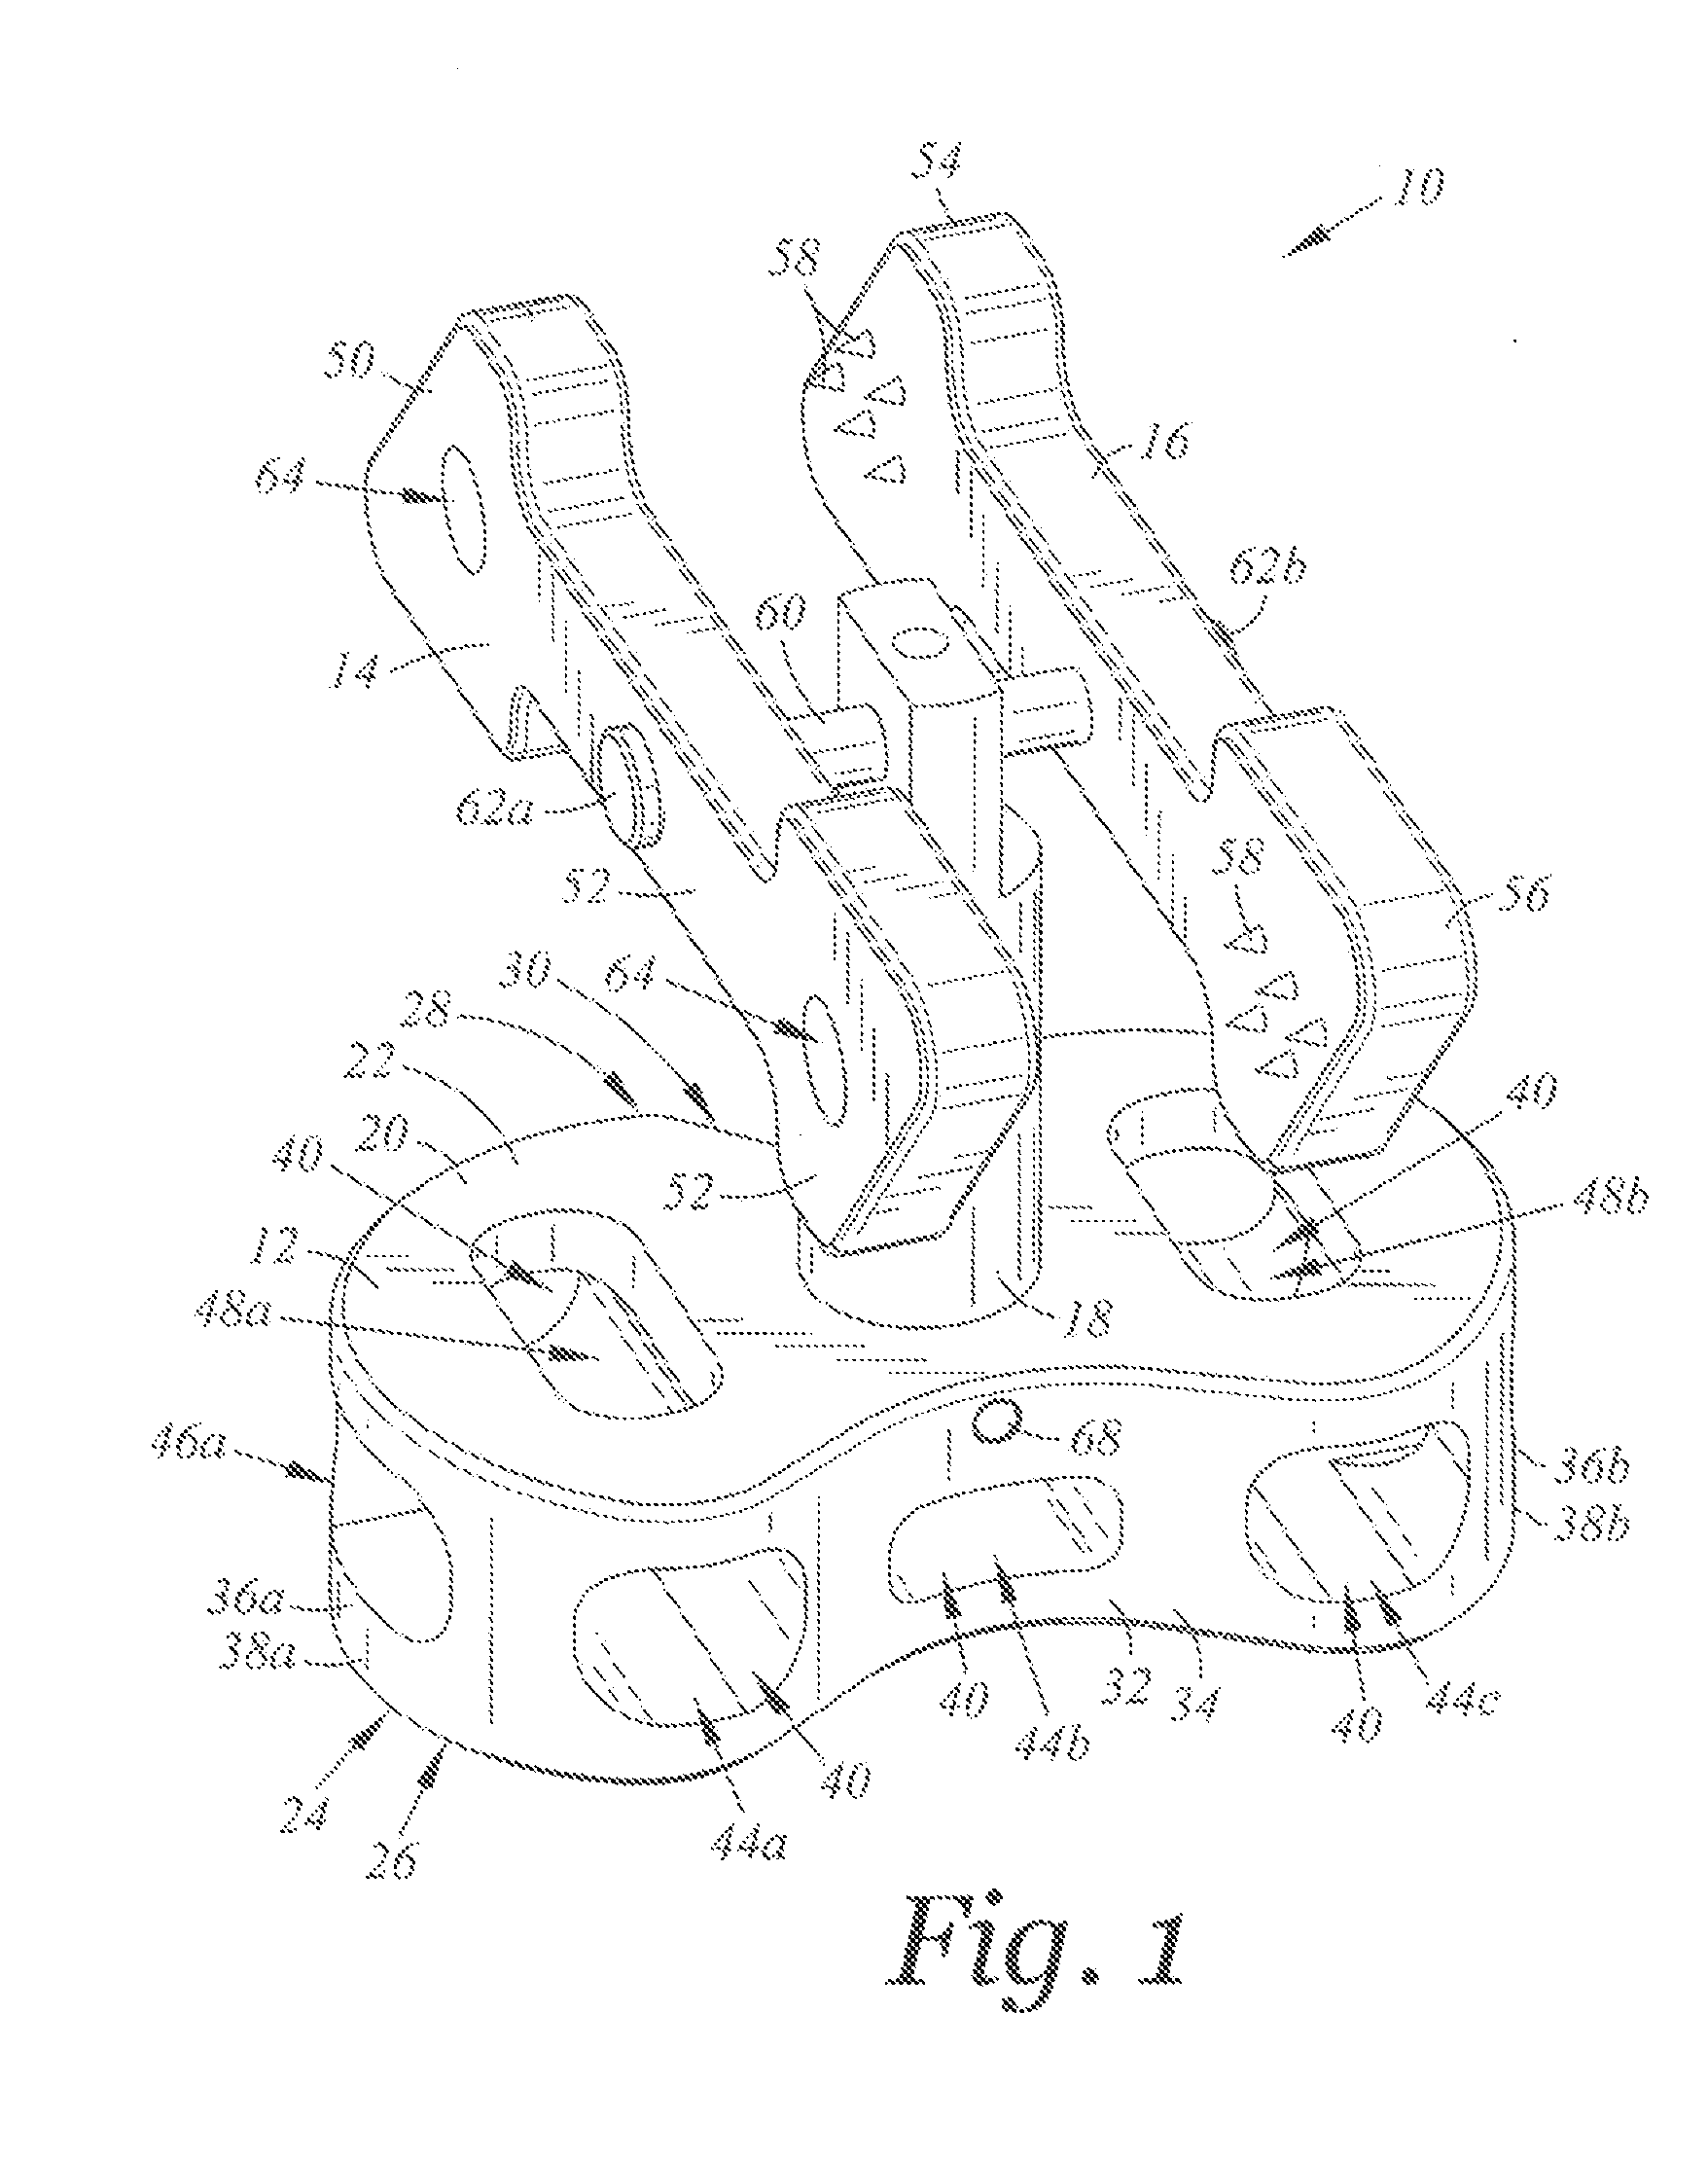 Spinal implant device with fusion cage and fixation plates and method of implanting